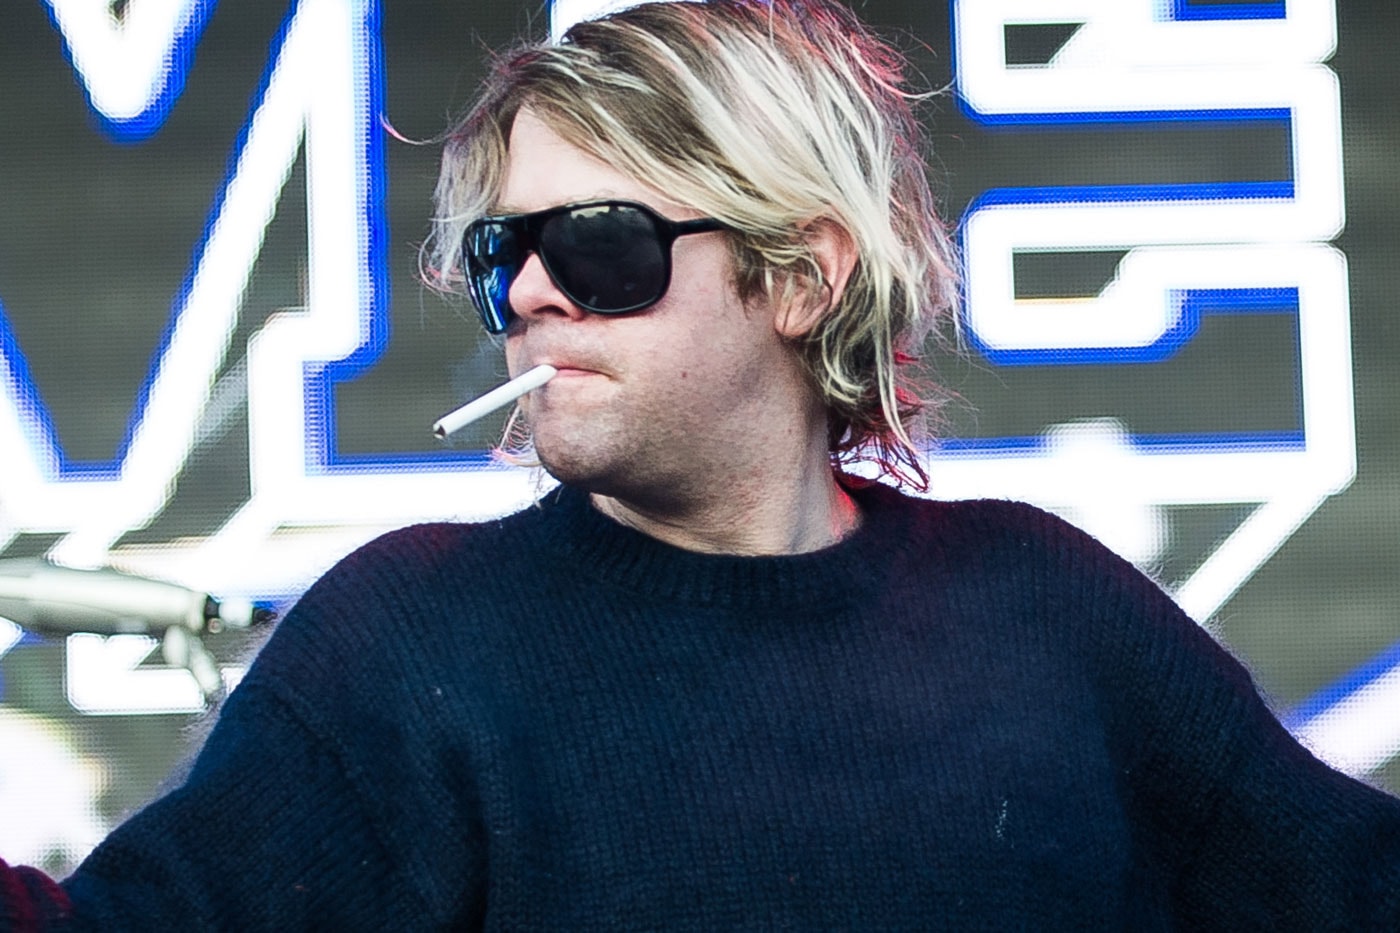 Ariel Pink Performs with Massive Choir for Festival Set